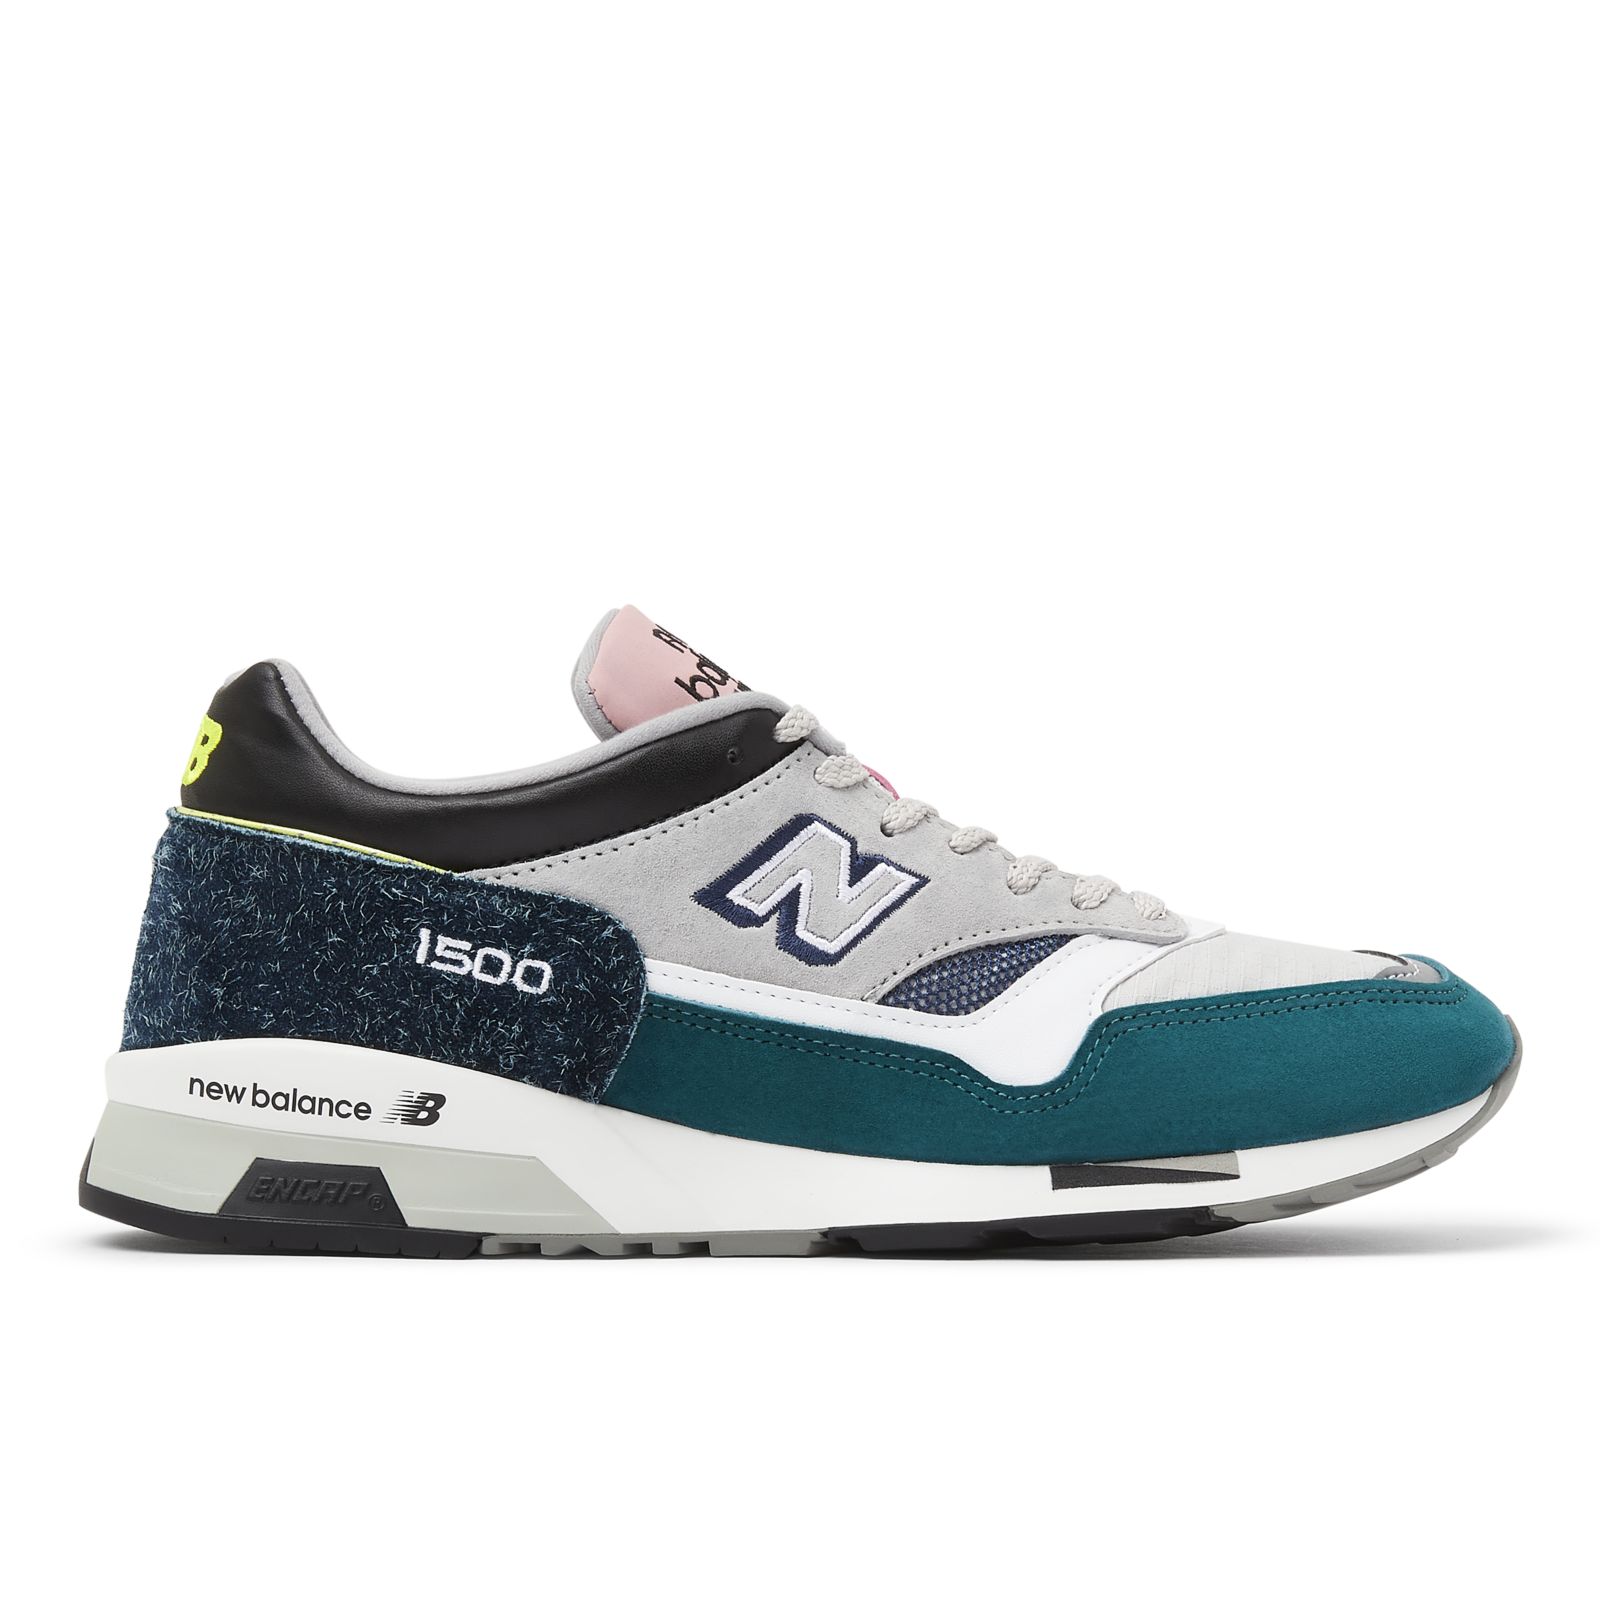 Men's in UK 1500 Shoes New Balance